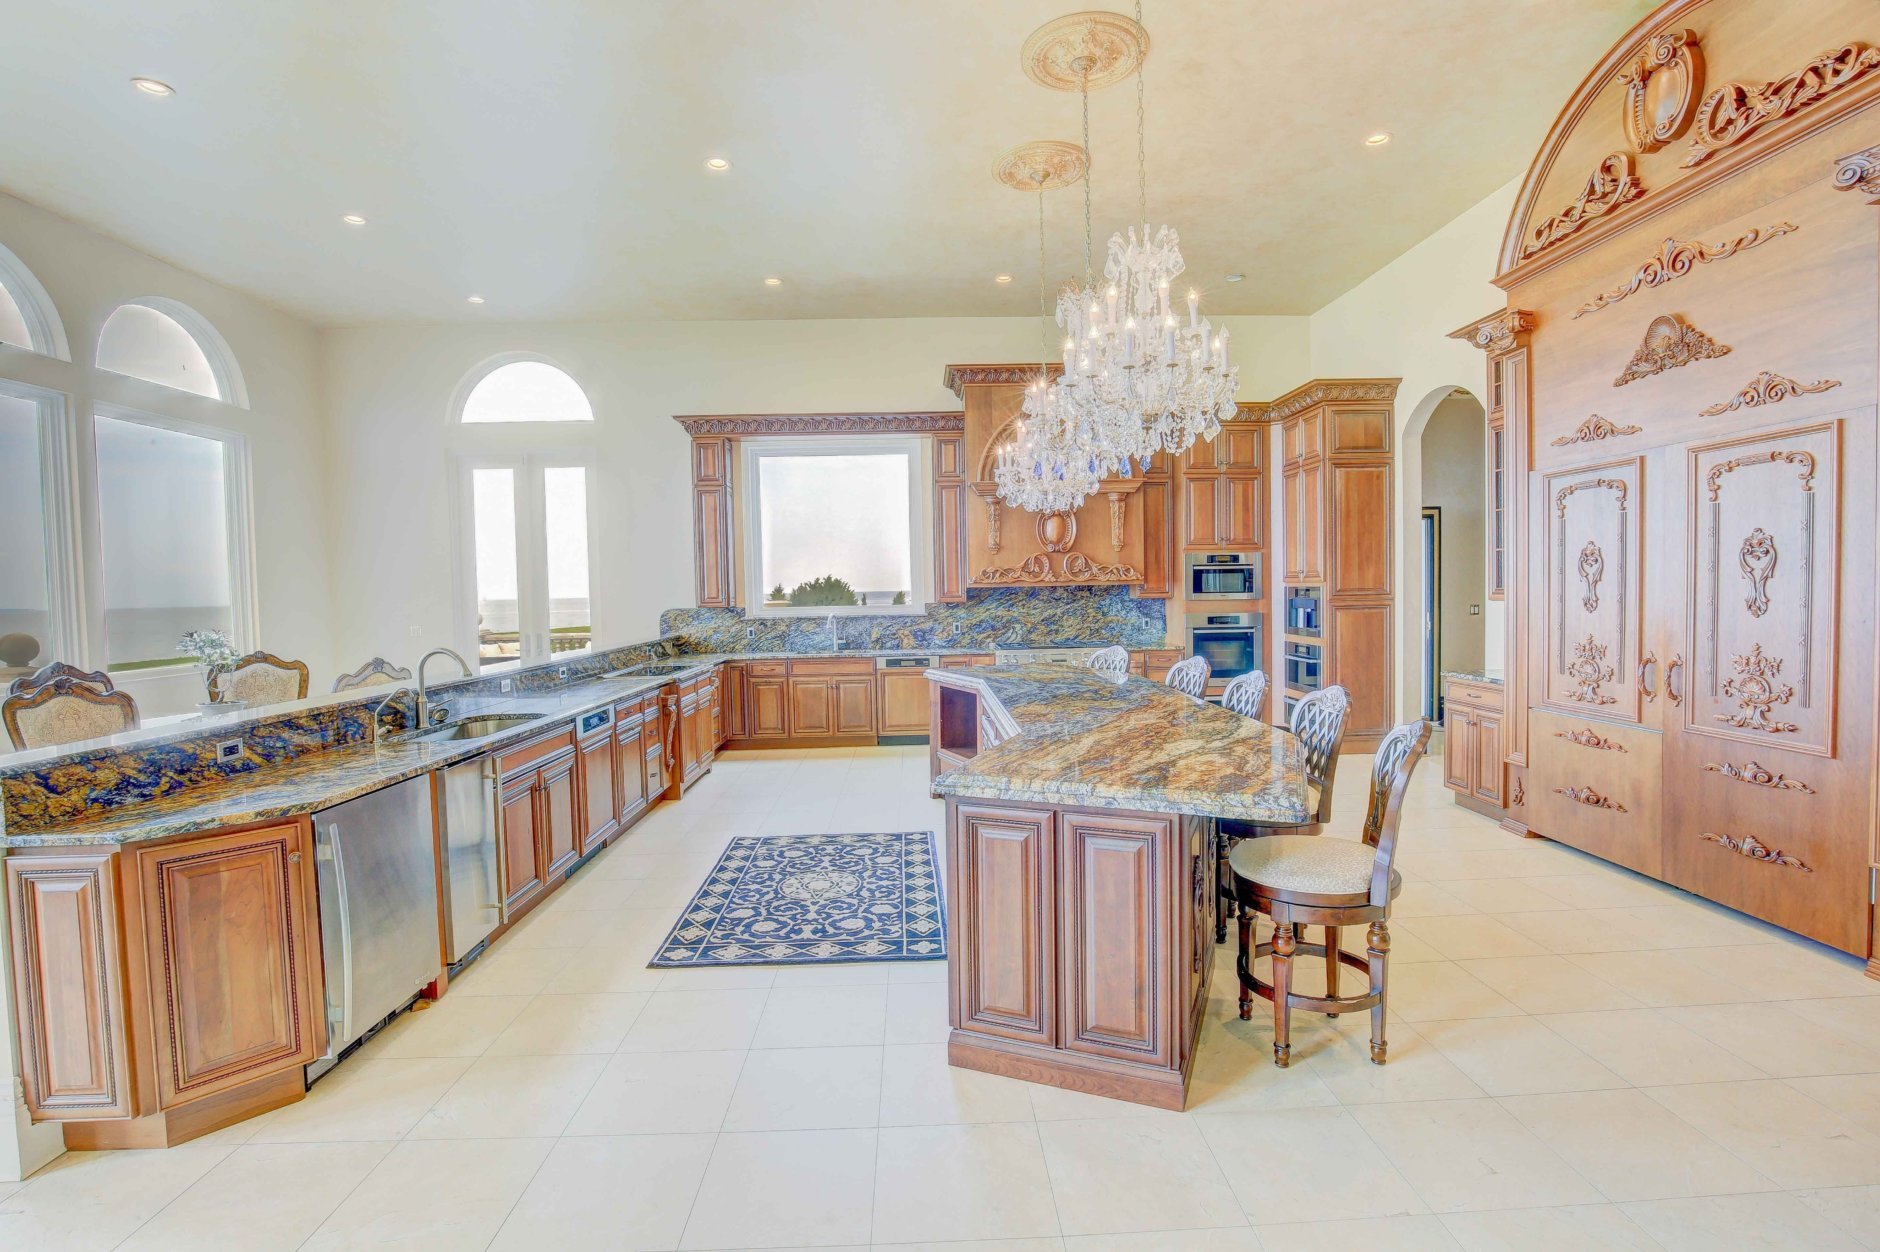 The Love Point estate features a large kitchen space and wet bar. (Courtesy Phil and Victoria Gerdes) 